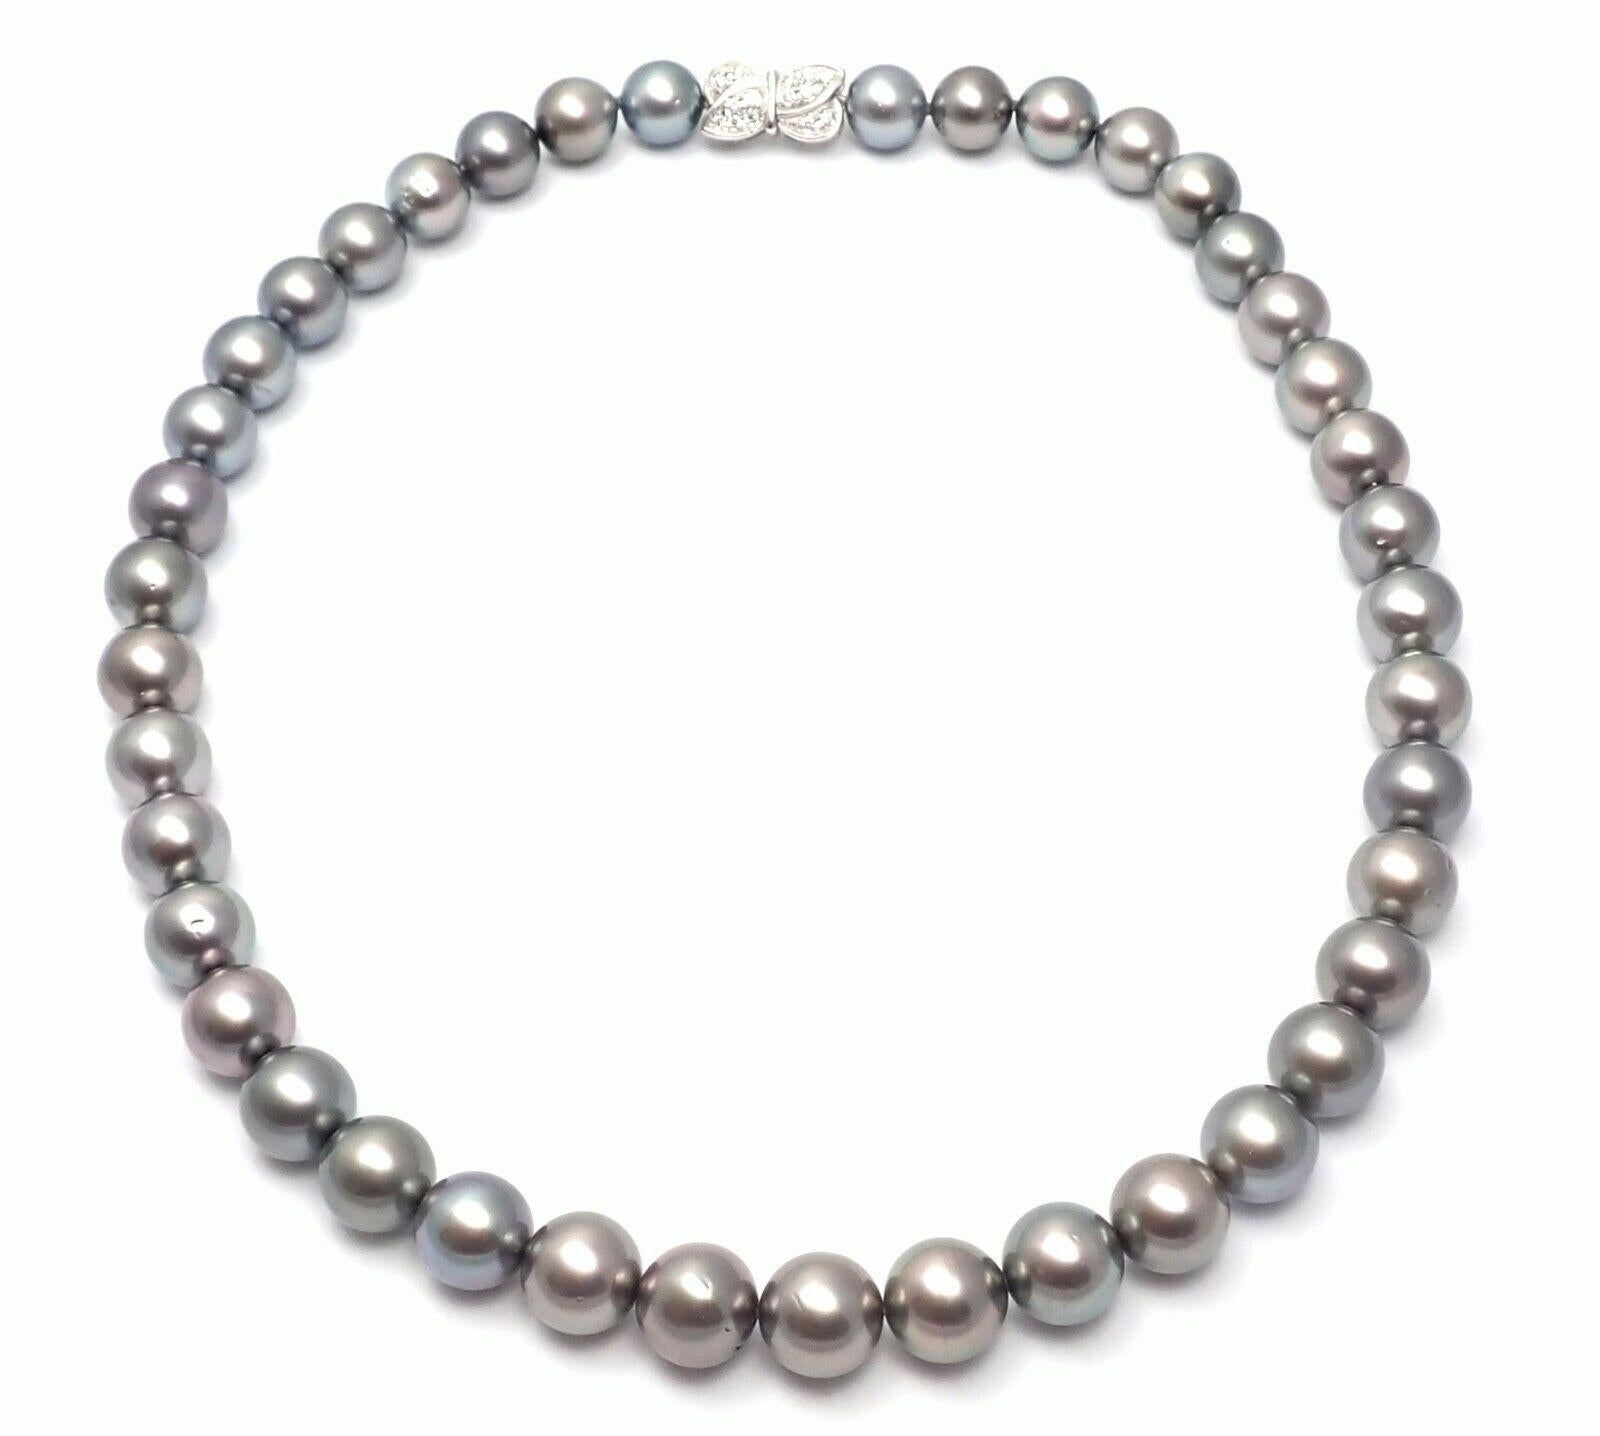 18k White Gold Diamond Tahitian Black South Sea Pearl Necklace by Mikimoto. 
With 14 Round brilliant cut diamonds
total weight .28ct
41 Tahitian Black South Sea black pearls from 9.5mm to 11mm
Details:
Necklace length: 16.5